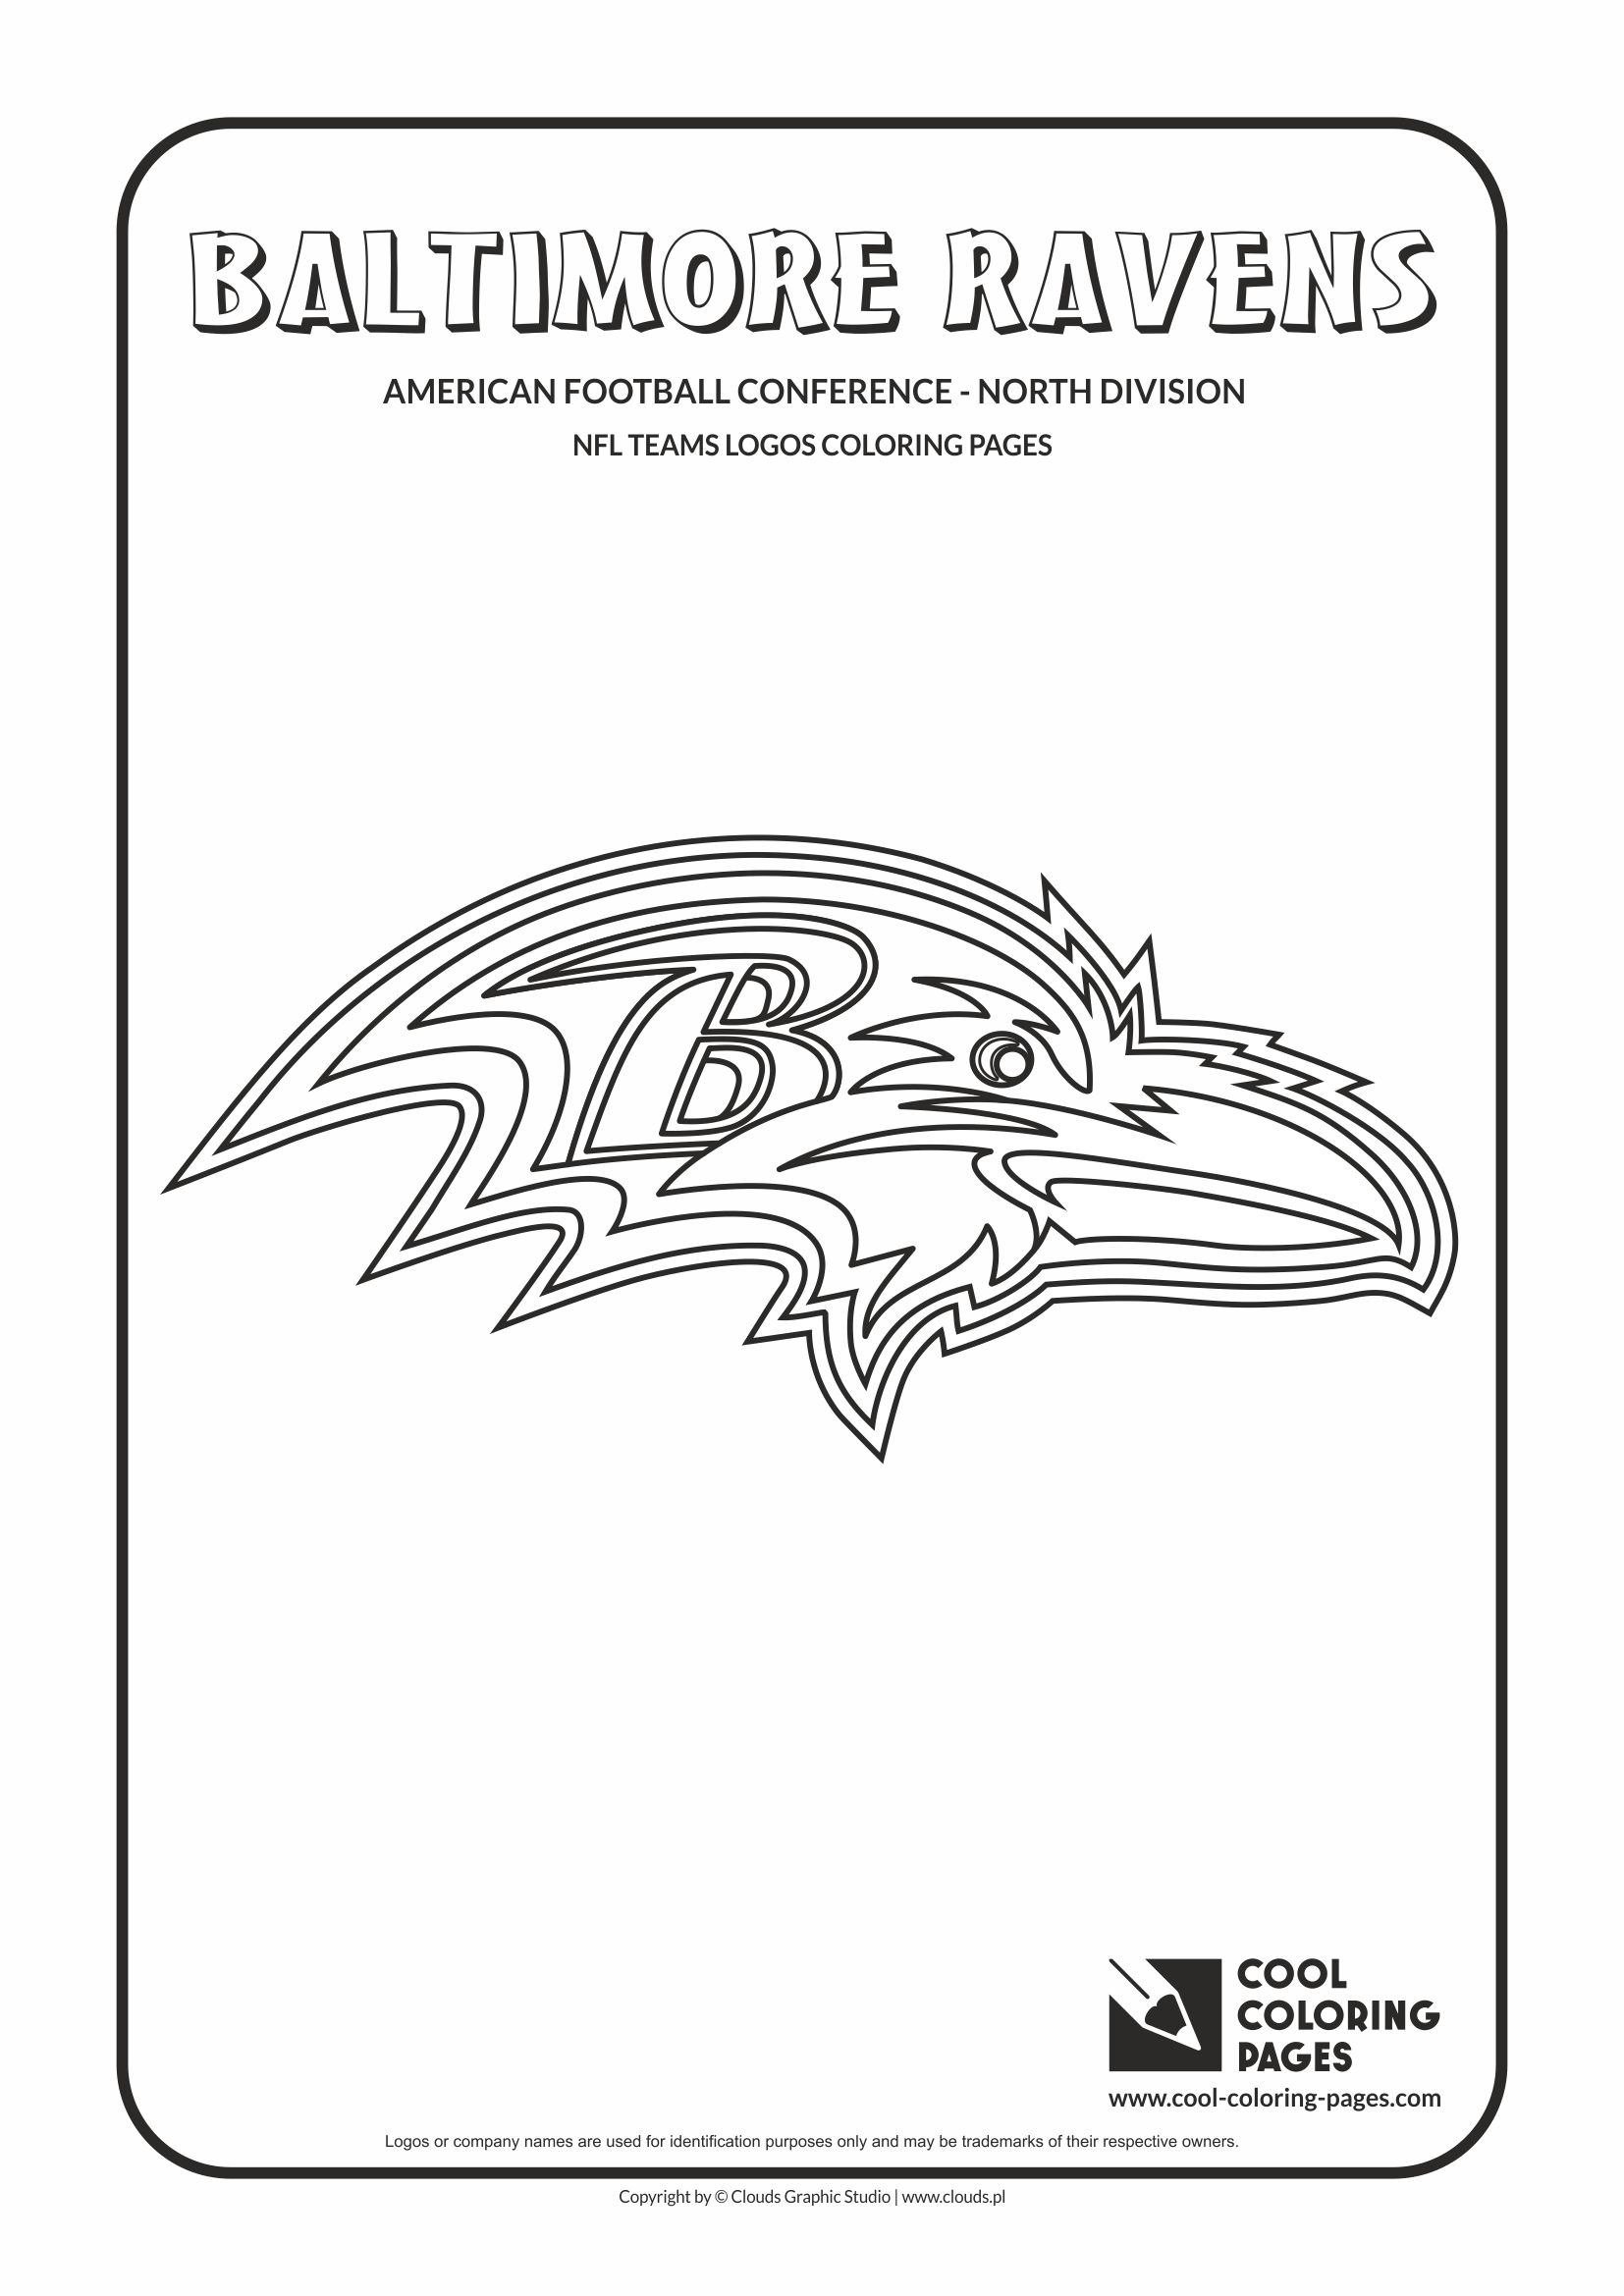 cool-coloring-pages-nfl-teams-logos-coloring-pages-cool-coloring